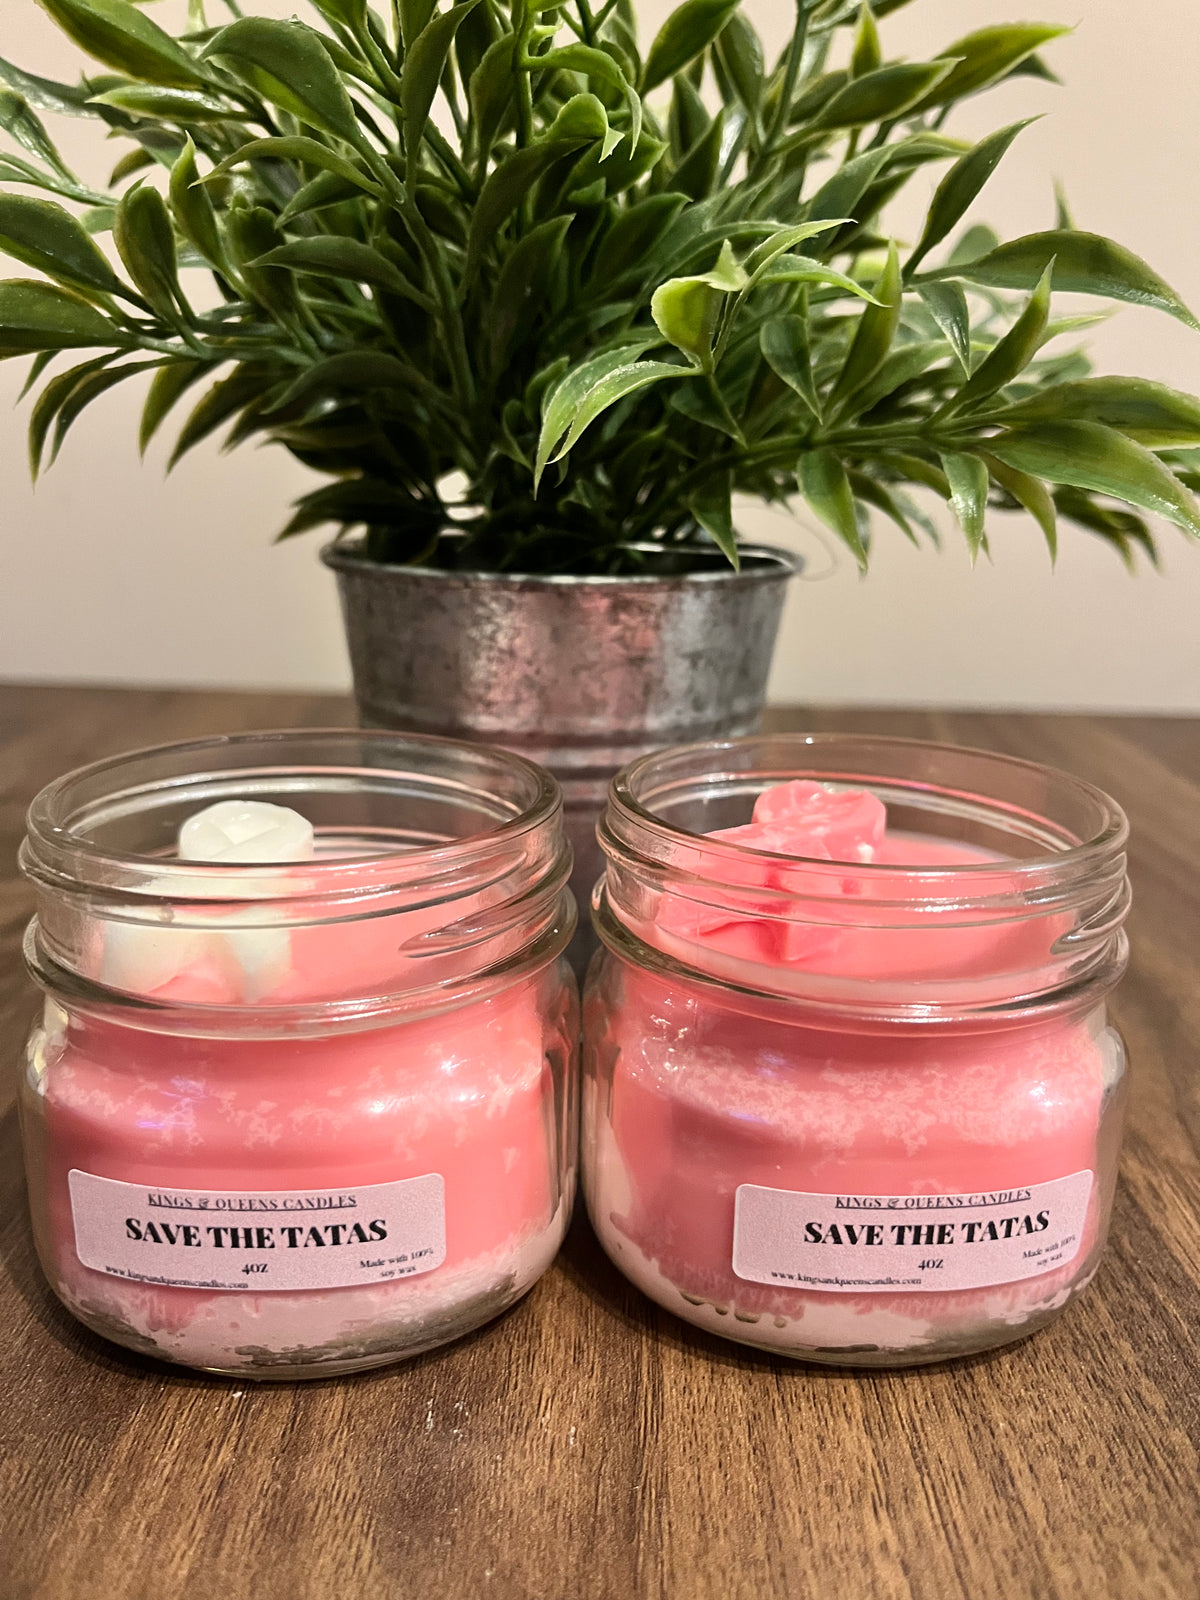 Pink & White Ribbon Candle Collection - Kings and Queens Candles